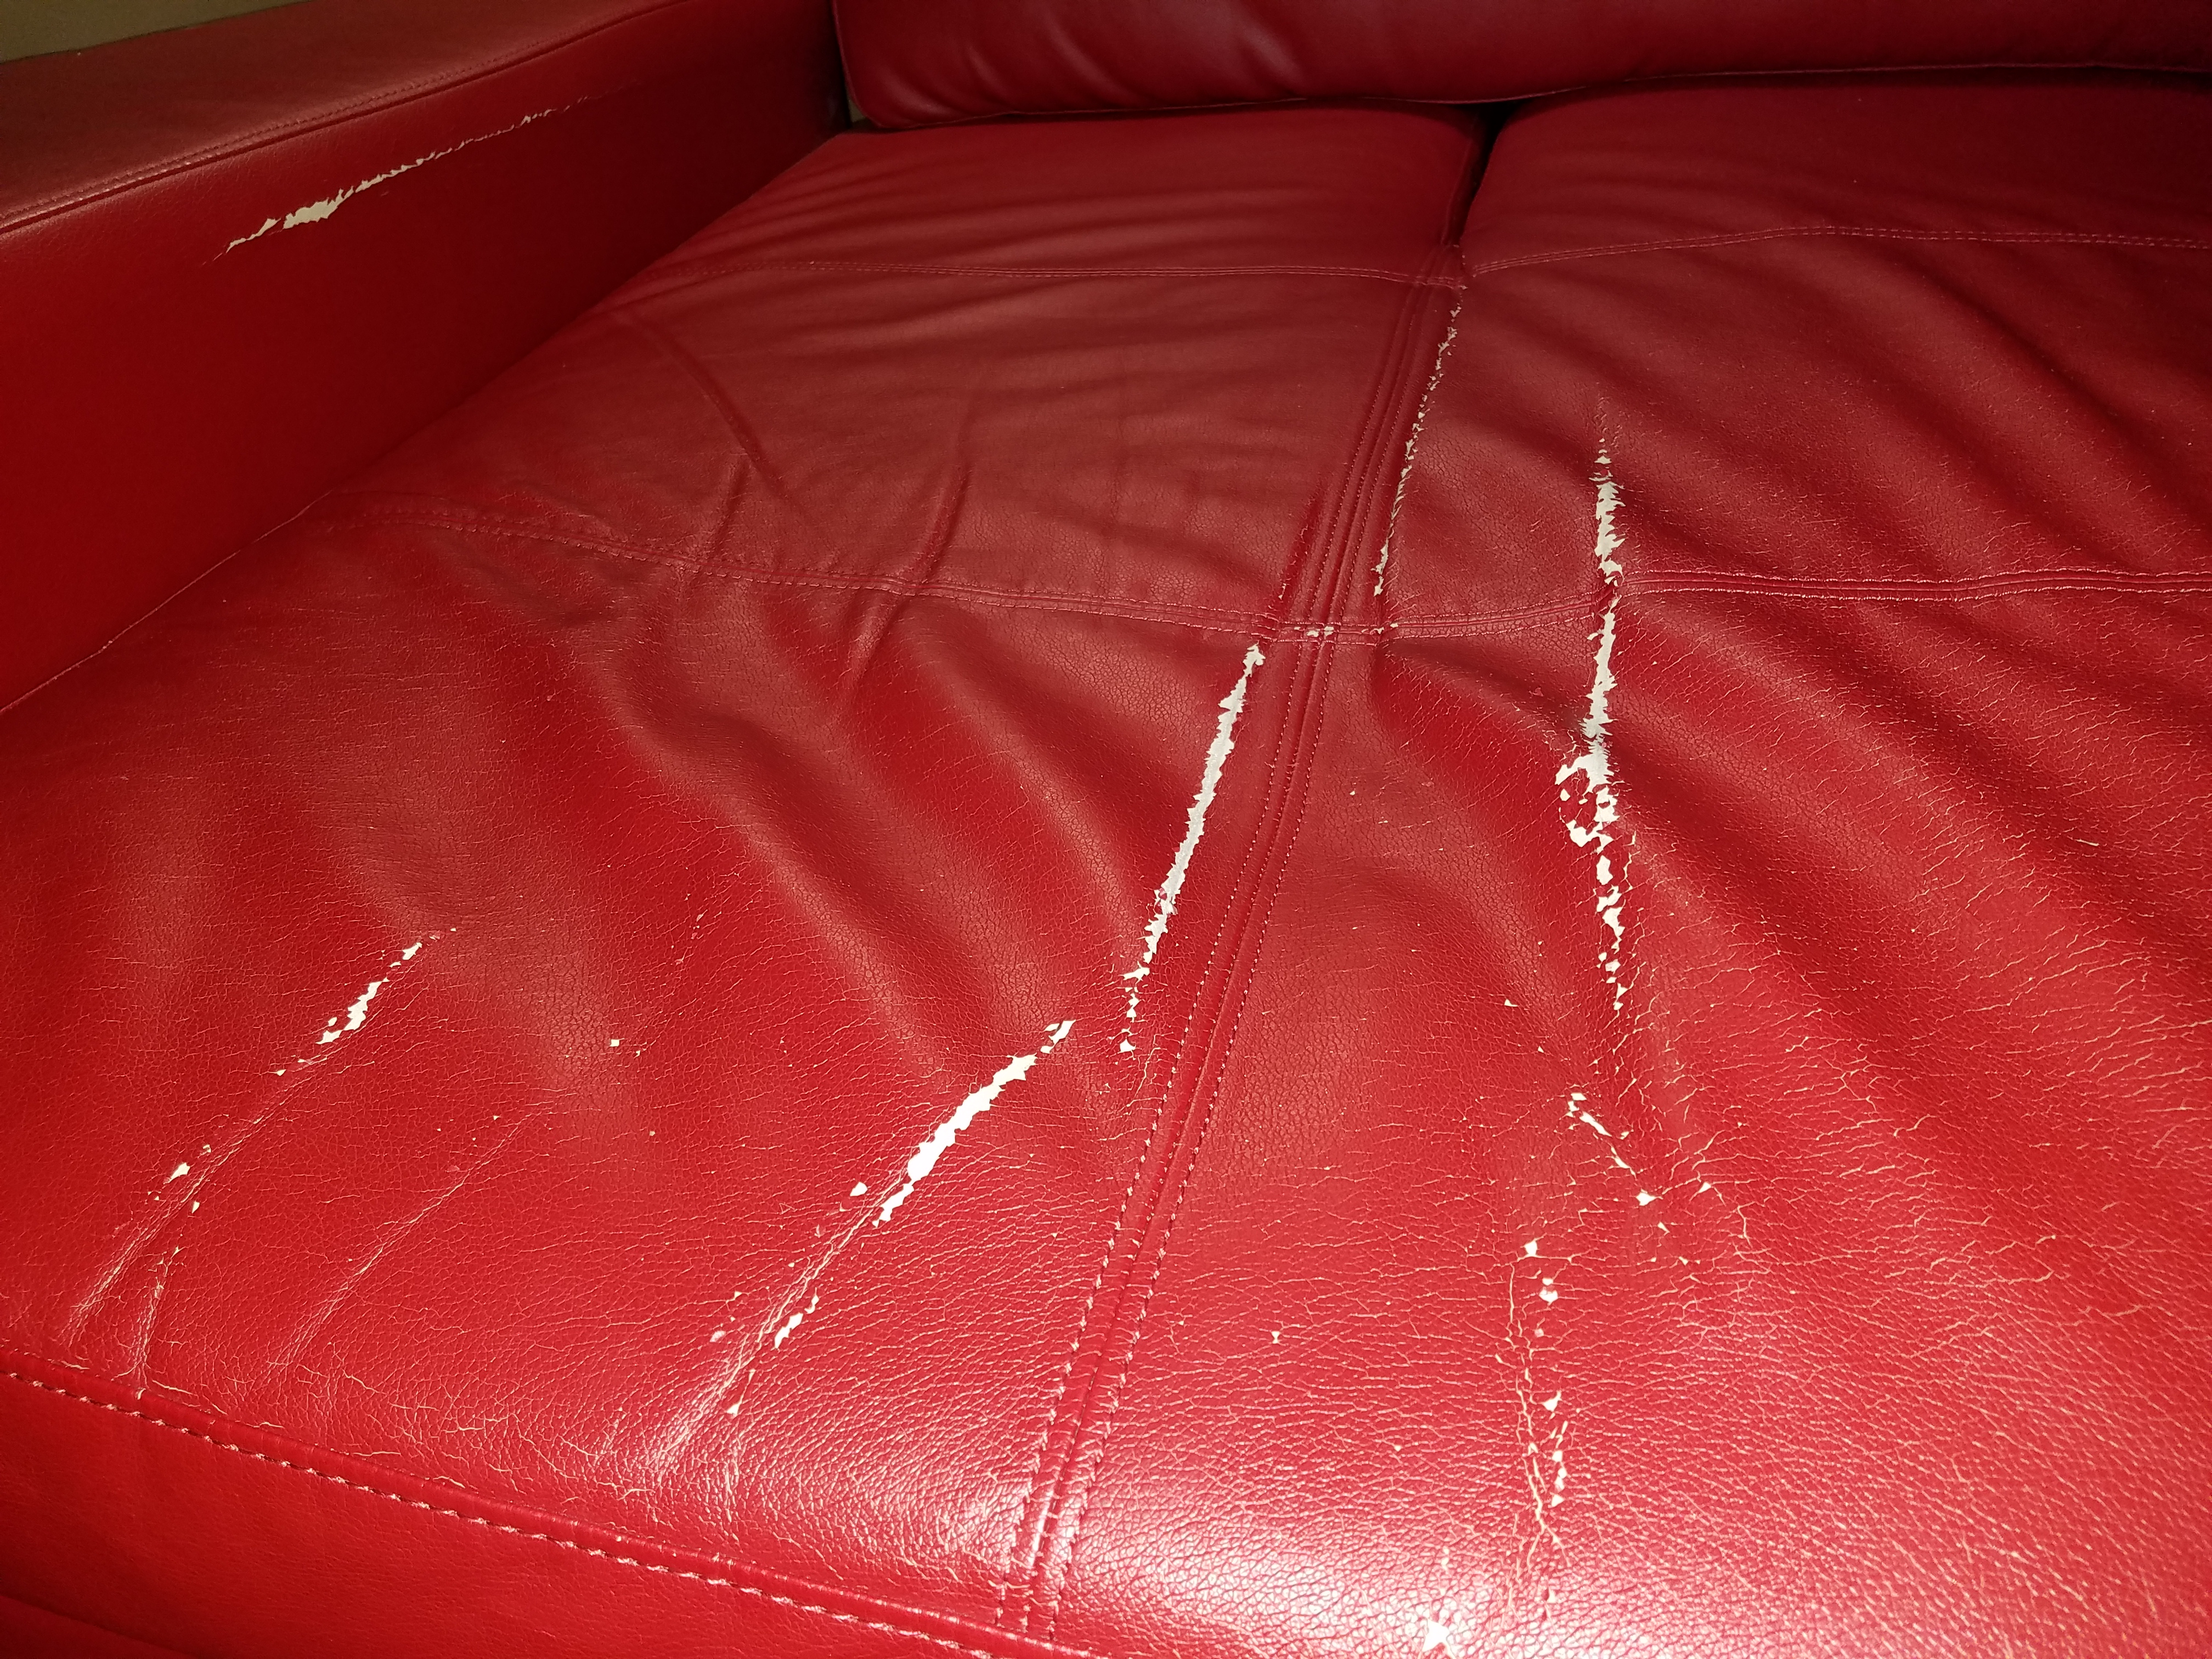 Actual damage to the sectional sold to me as real leather by Marlo. Now that it is cracking and the paint is coming off, one can see it is actually not leather. 